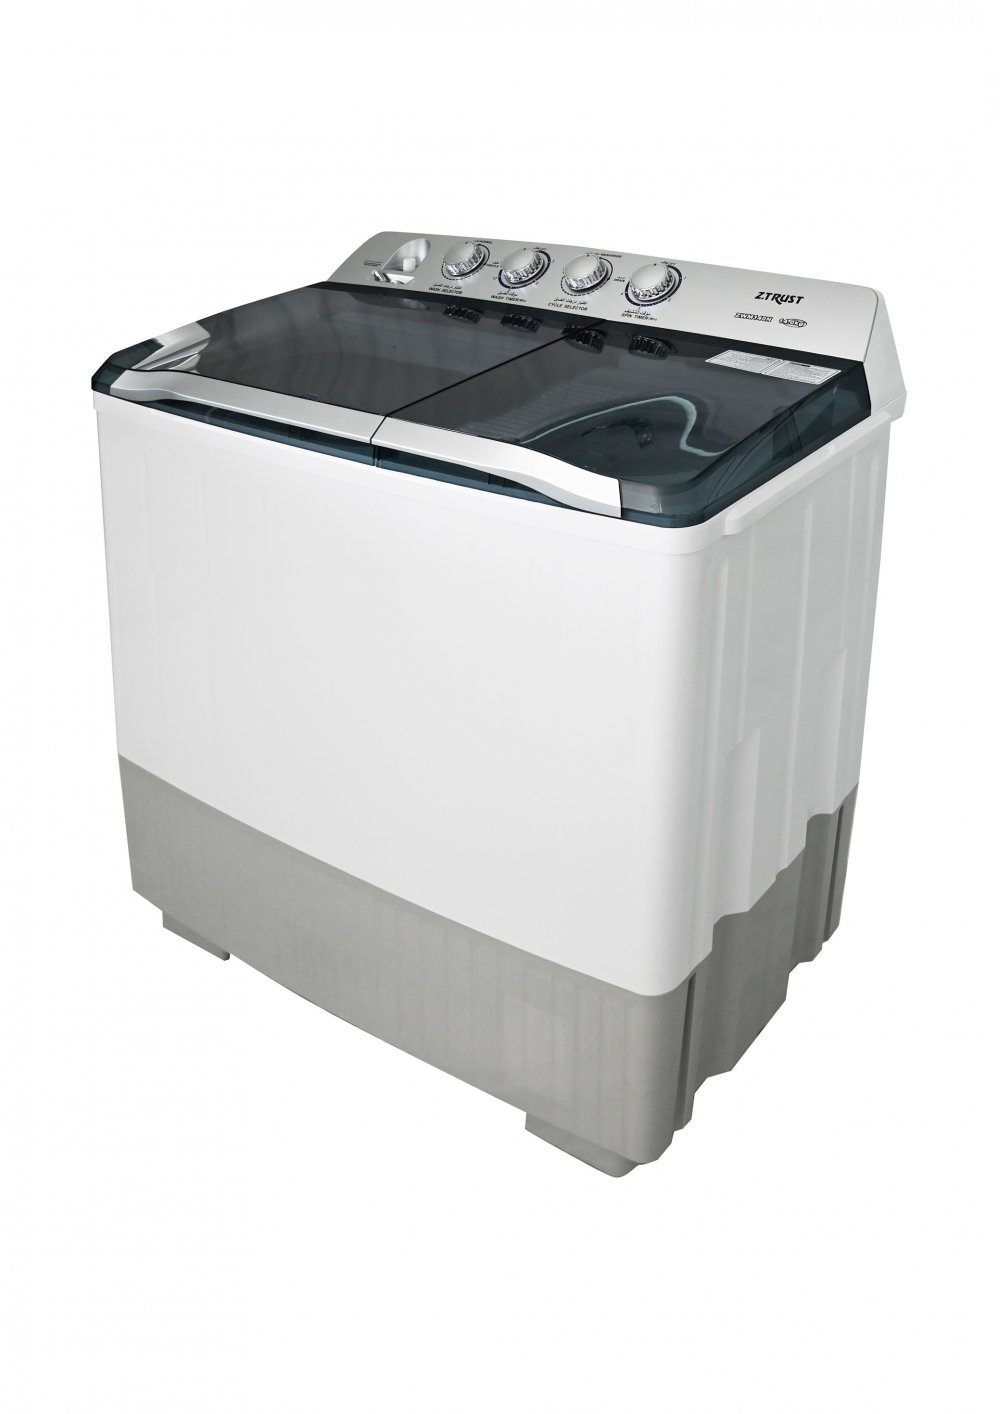 Twin/Top washer, 14K/W,7K/D